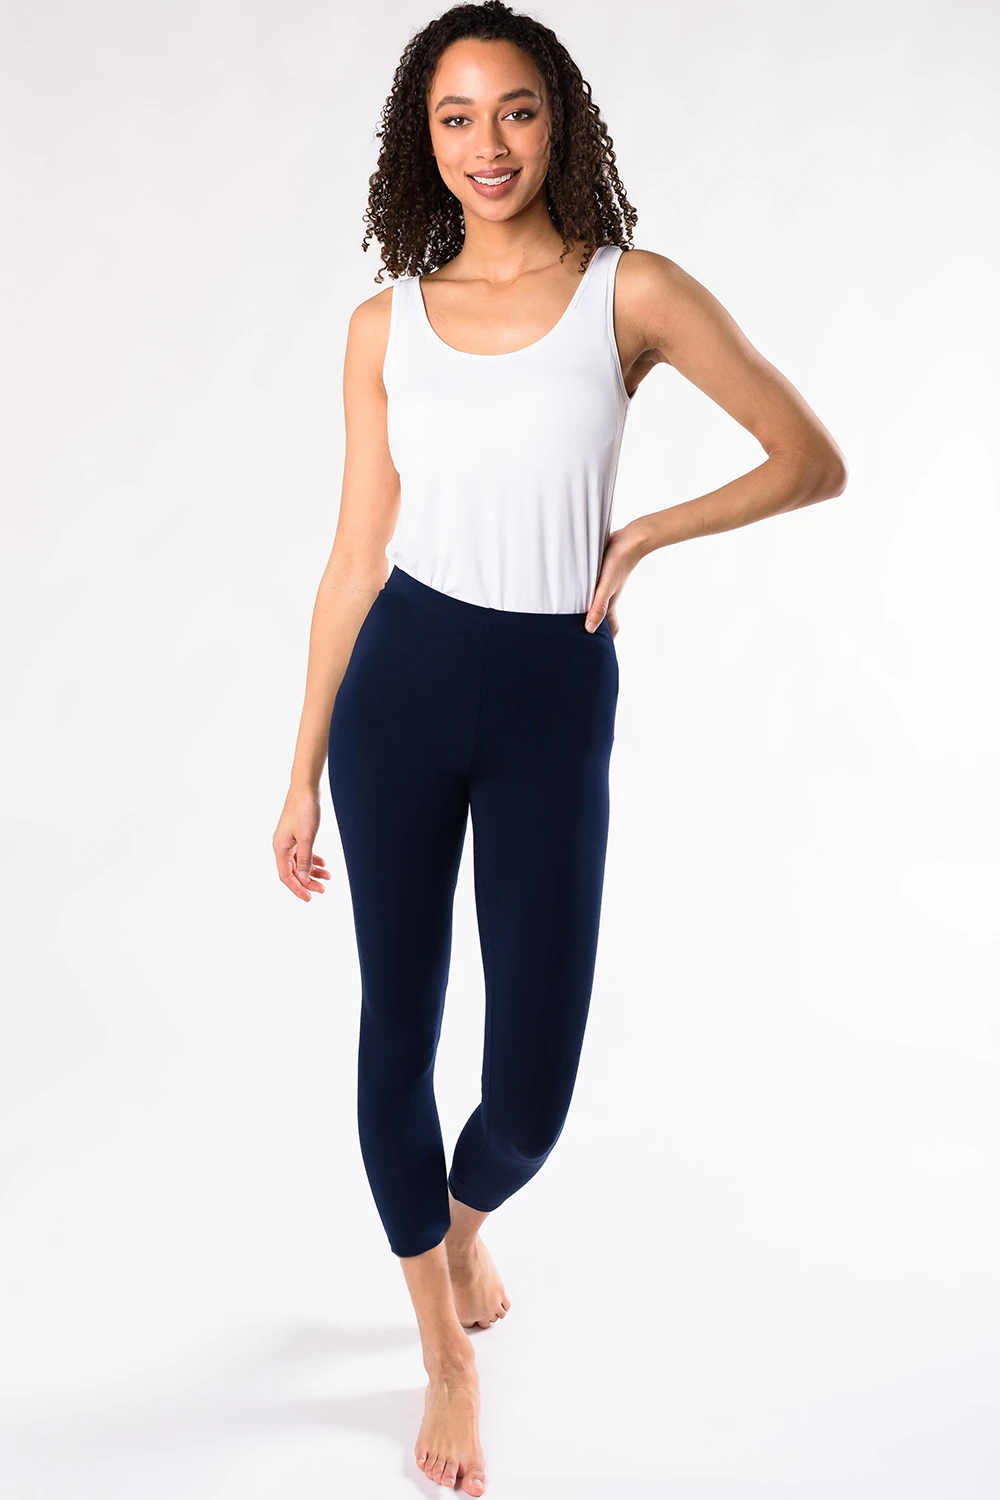 Buy online Golden Solid Ankle Length Legging from Capris & Leggings for  Women by Clora Creation for ₹620 at 38% off